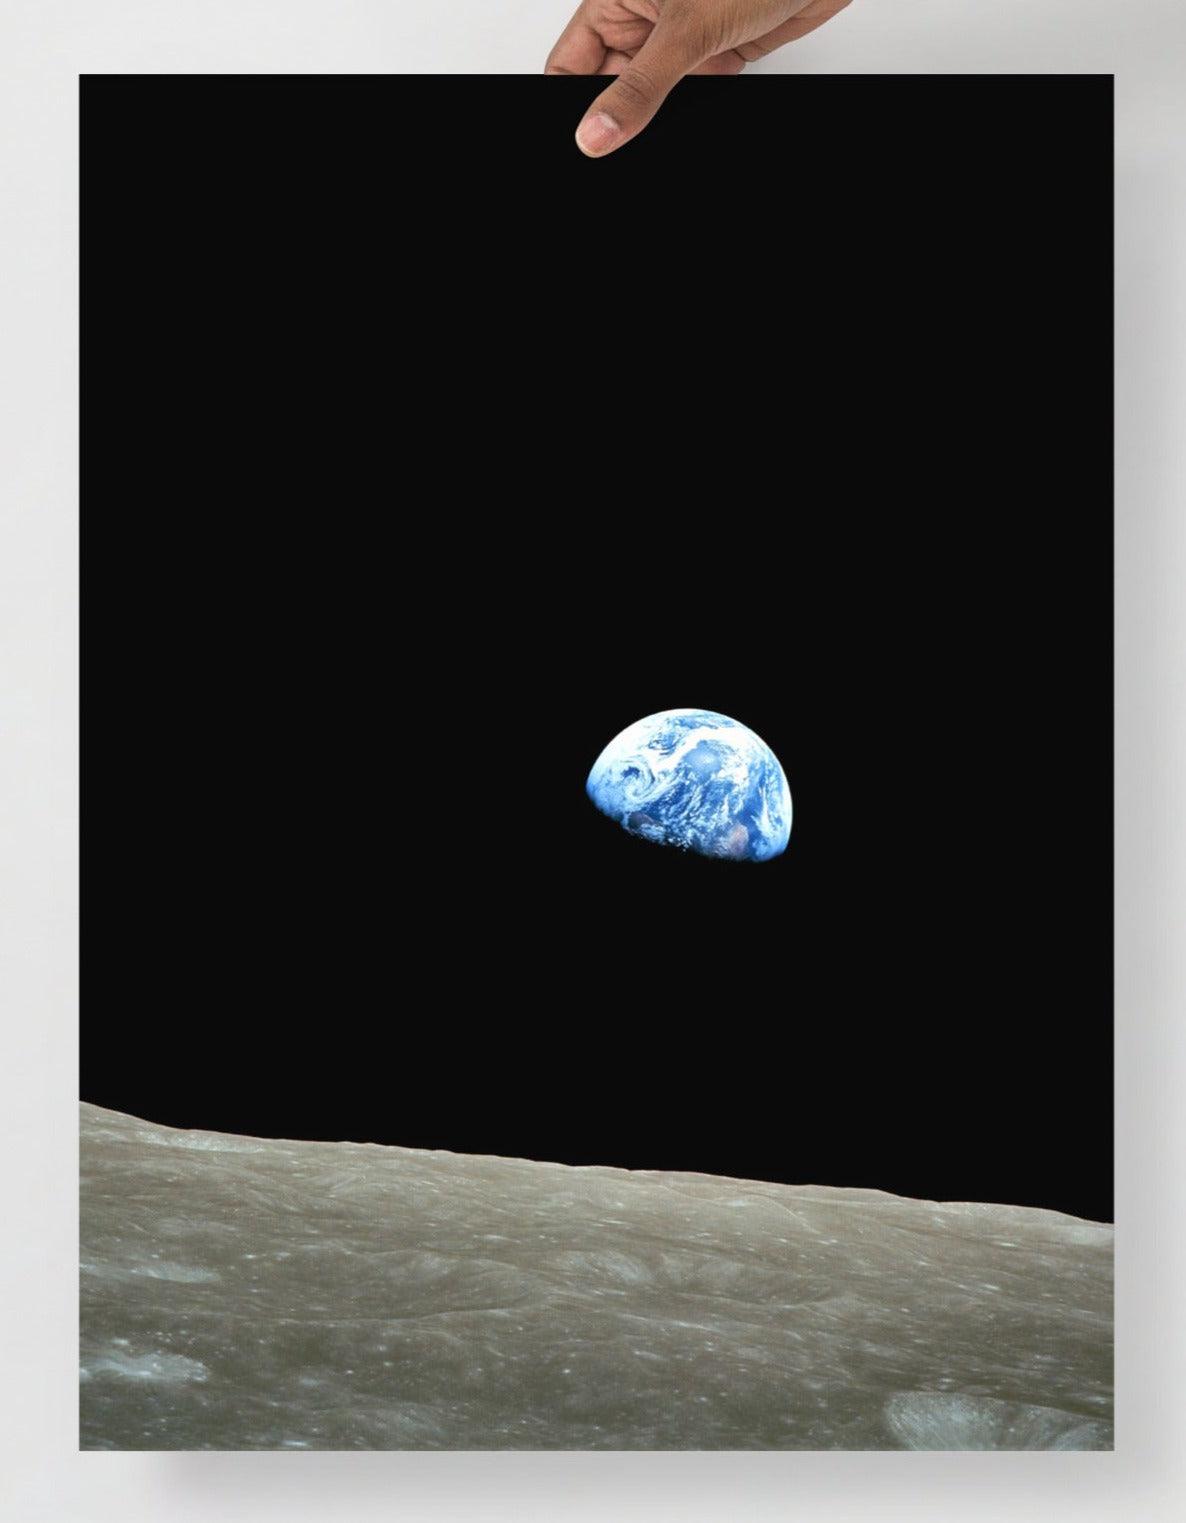 An Earthrise Apollo 8 poster on a plain backdrop in size 18x24”.